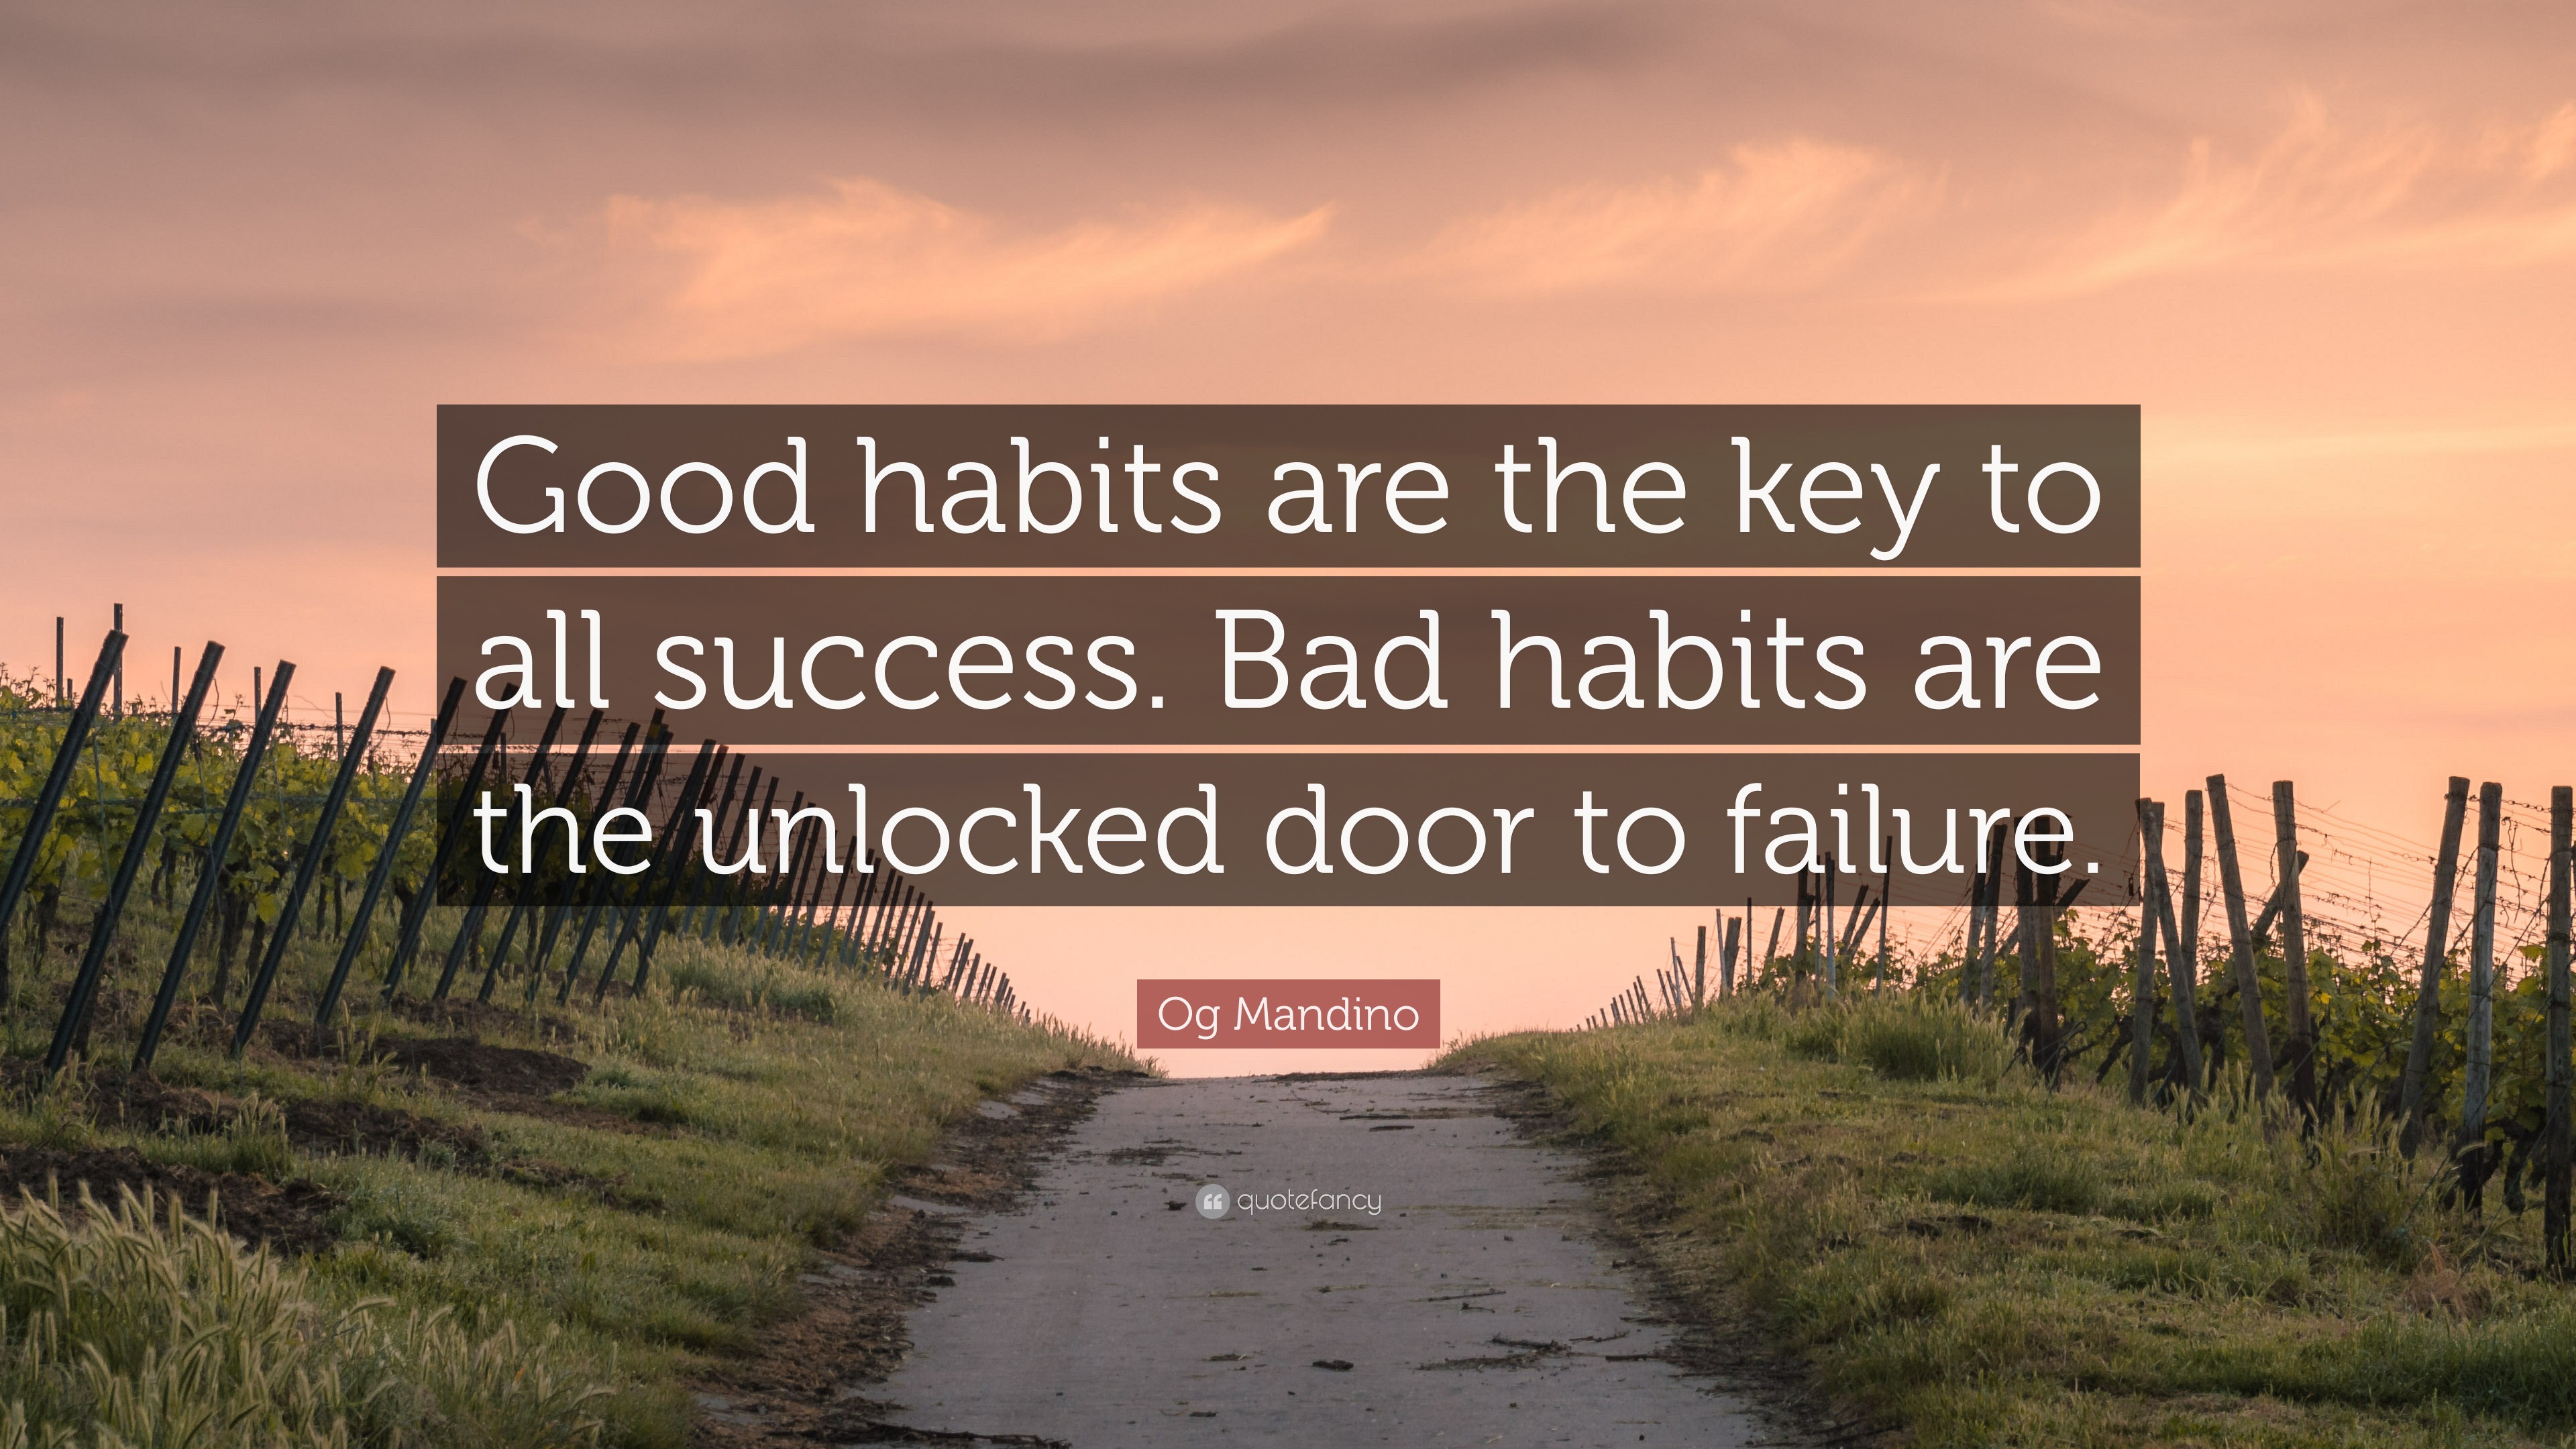 Og Mandino Quote “Good habits are the key to all success